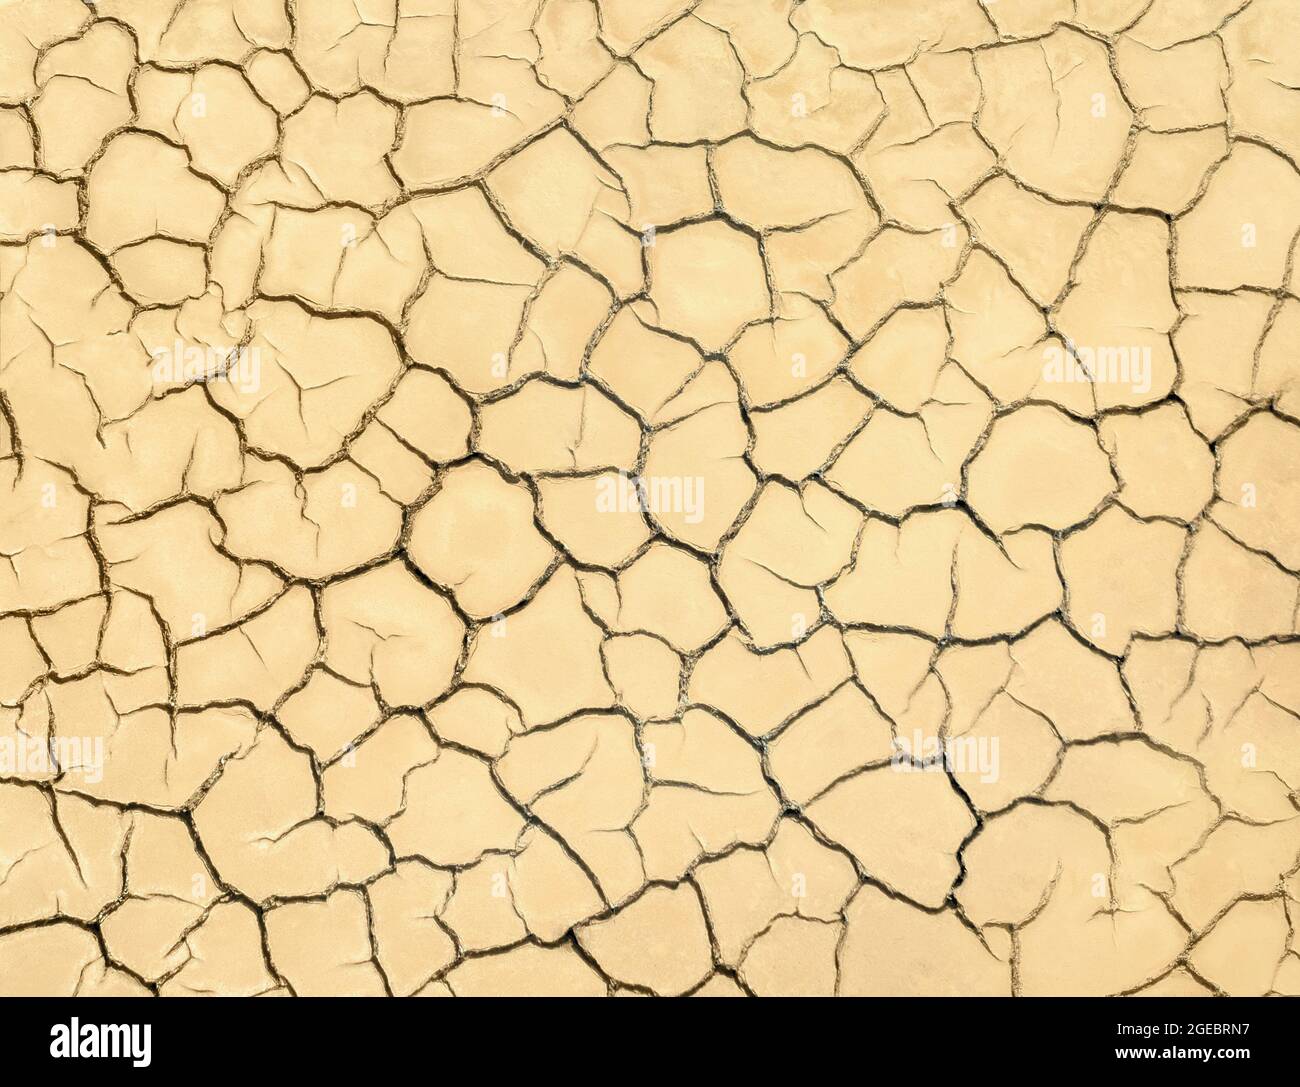 Cracked soil of barren land. Wasteland texture close up Stock Photo